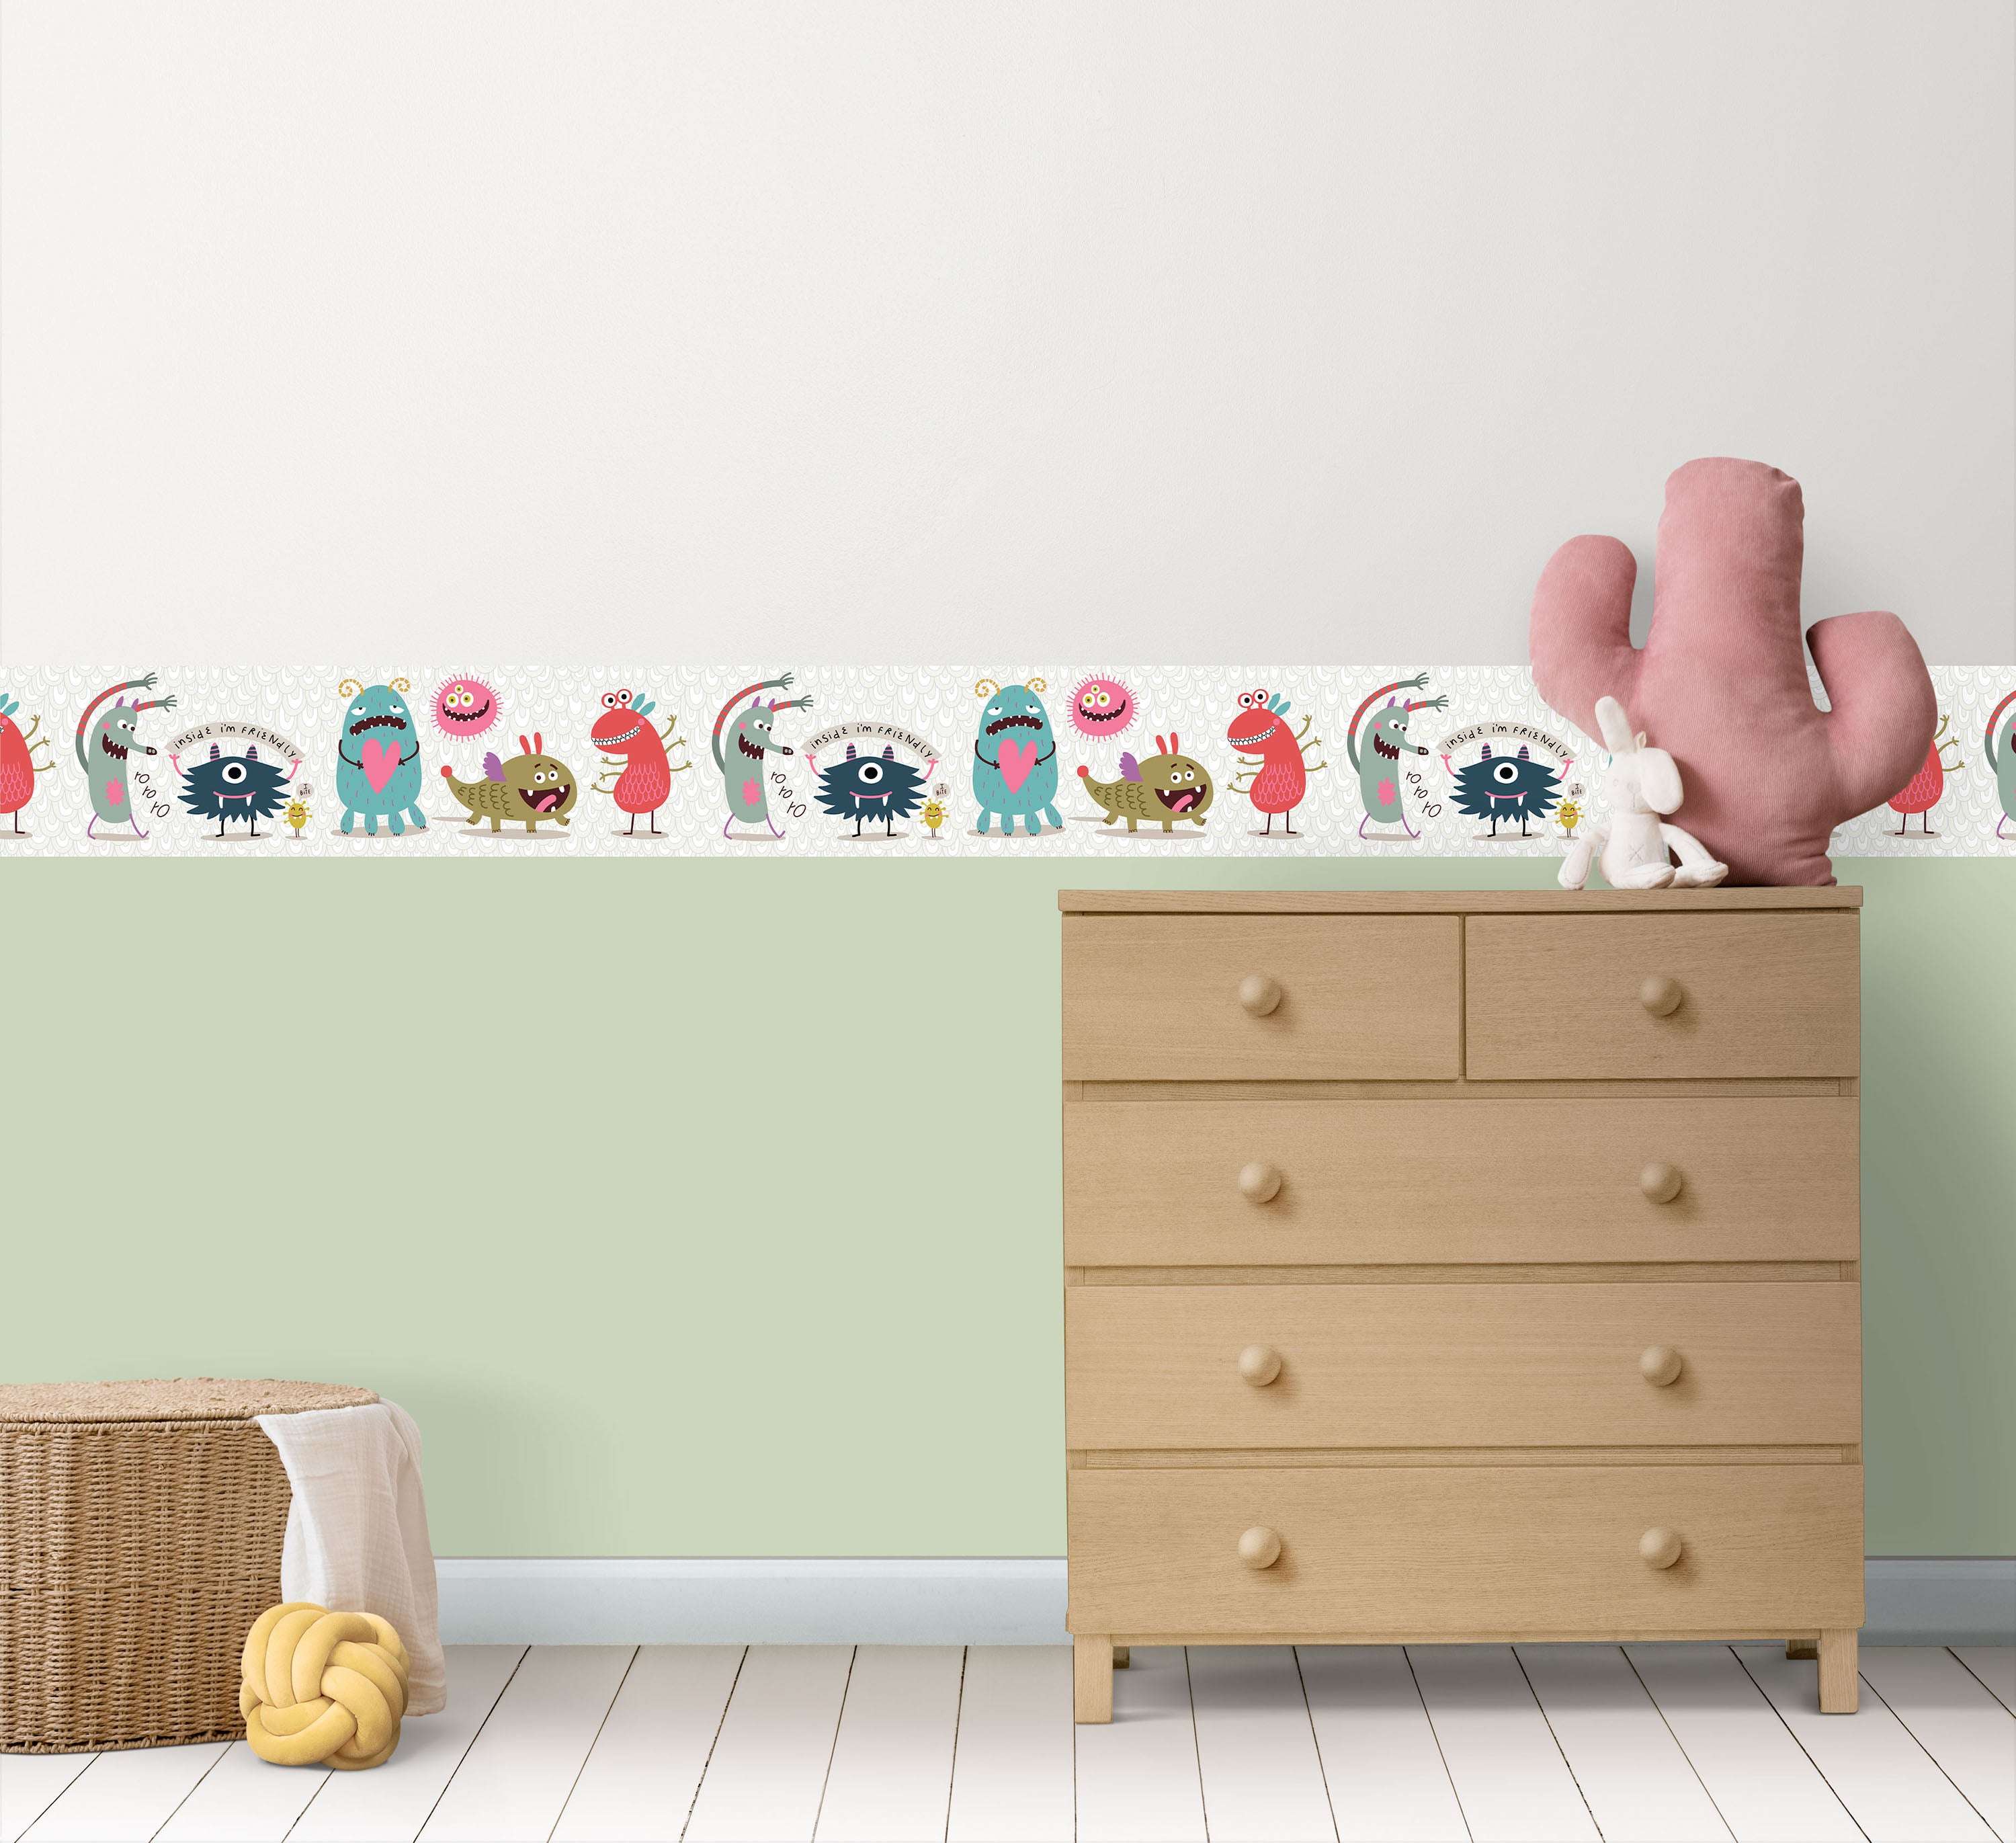 GB90131g8 Cuddly Monsters Peel and Stick Wallpaper Border 8in Height x 18ft Long, White Gray Blue Pink